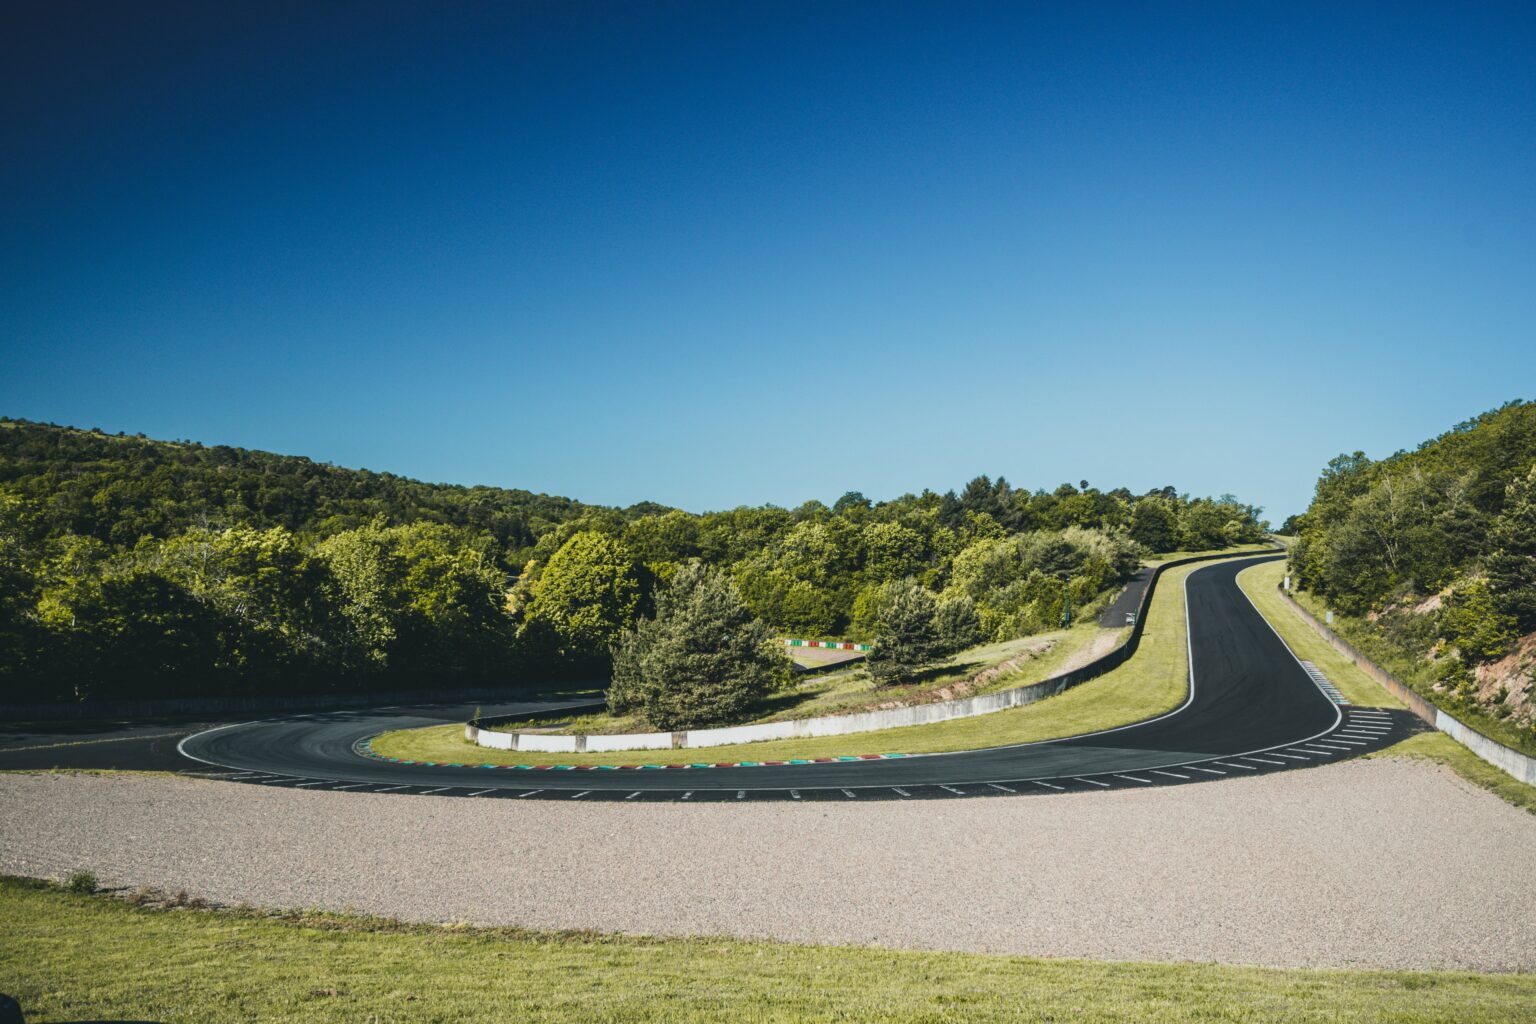 The Charade Circuit in France, the best circuit in the world according to some racing legends like Sir Stirling Moss.